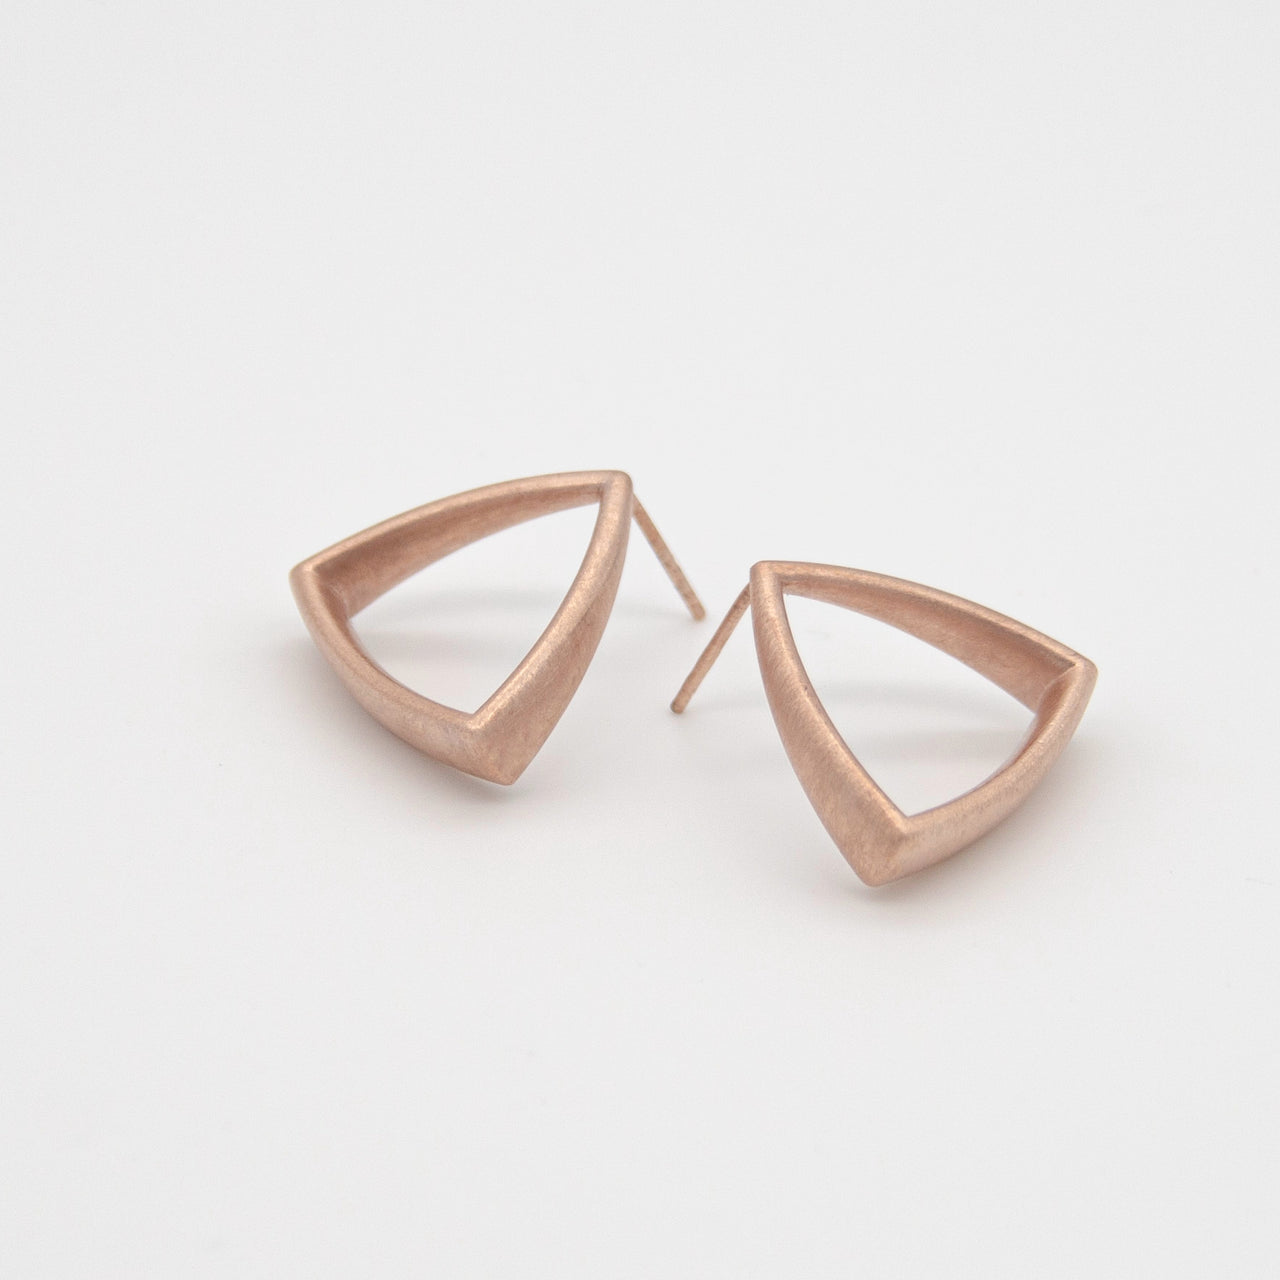 Curved Curves Triangle Earrings Rose Gold